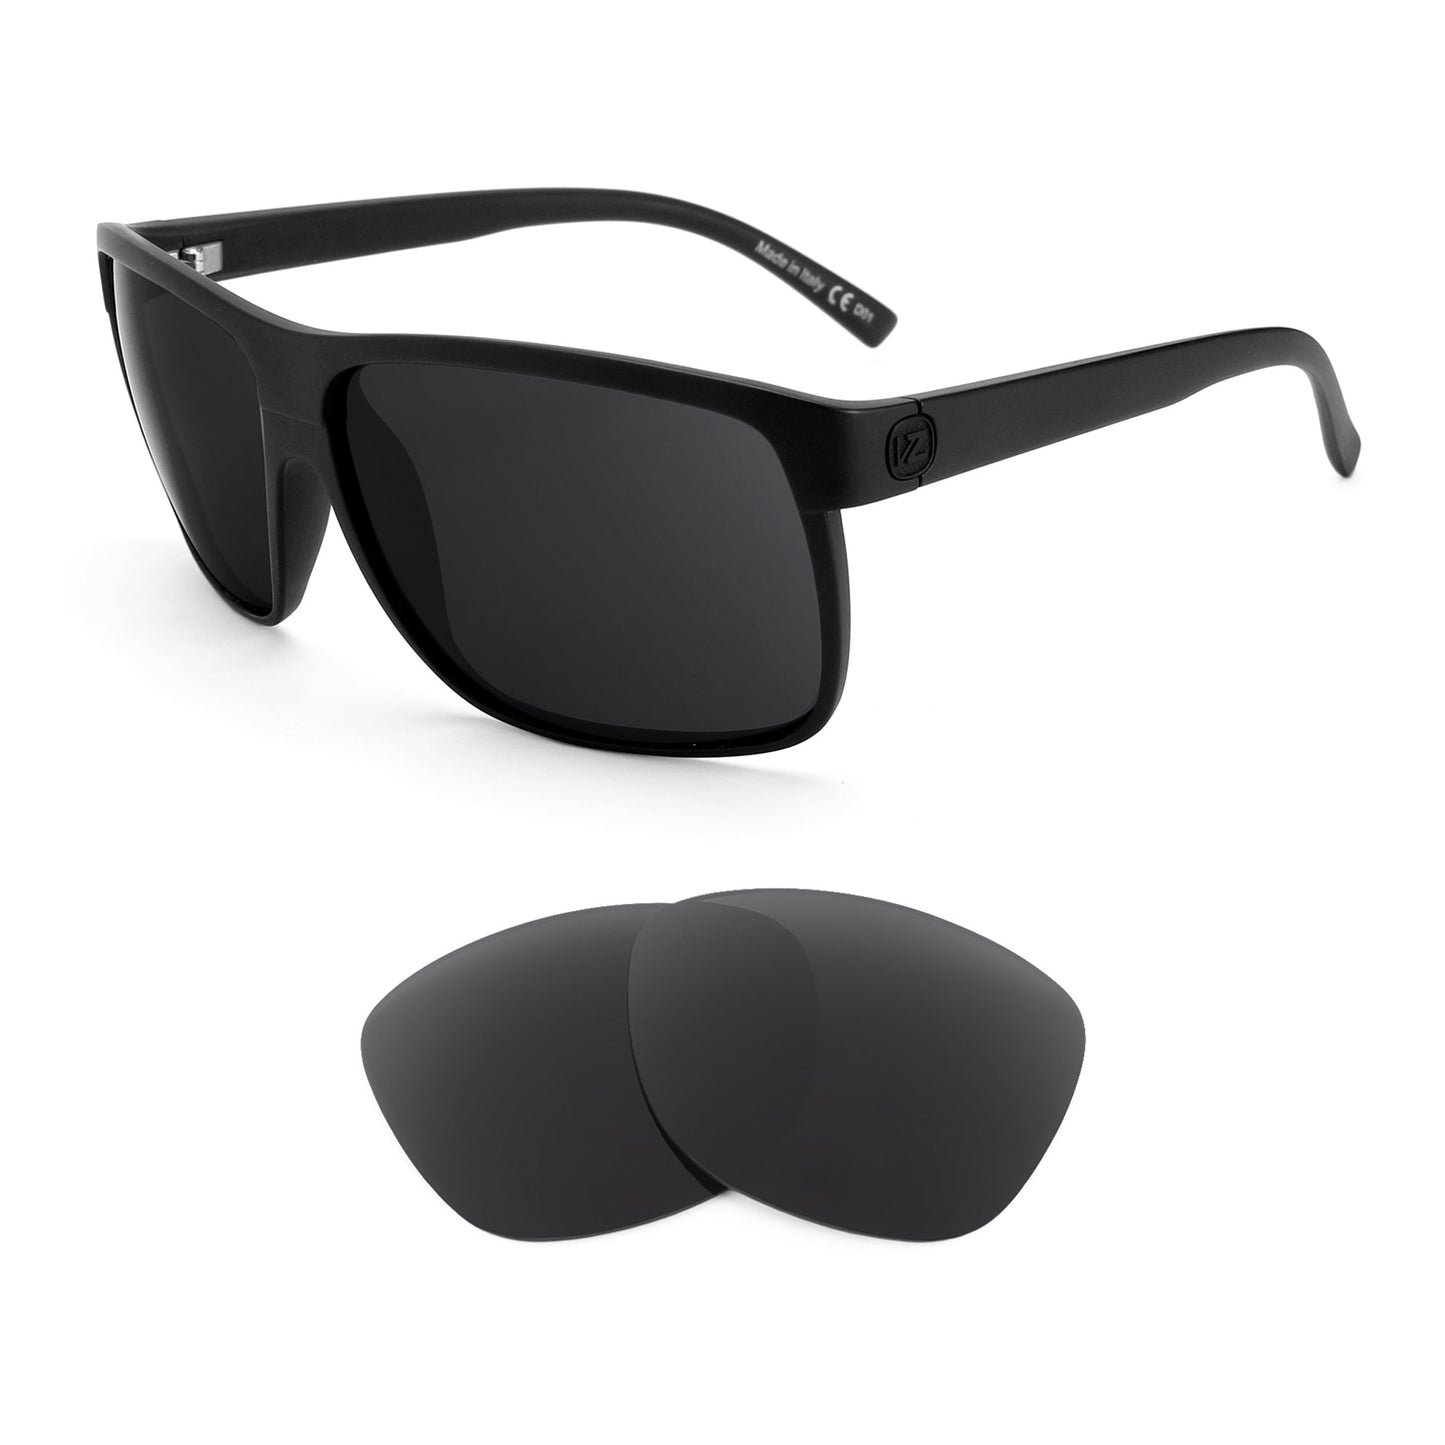 VonZipper Sidepipe sunglasses with replacement lenses